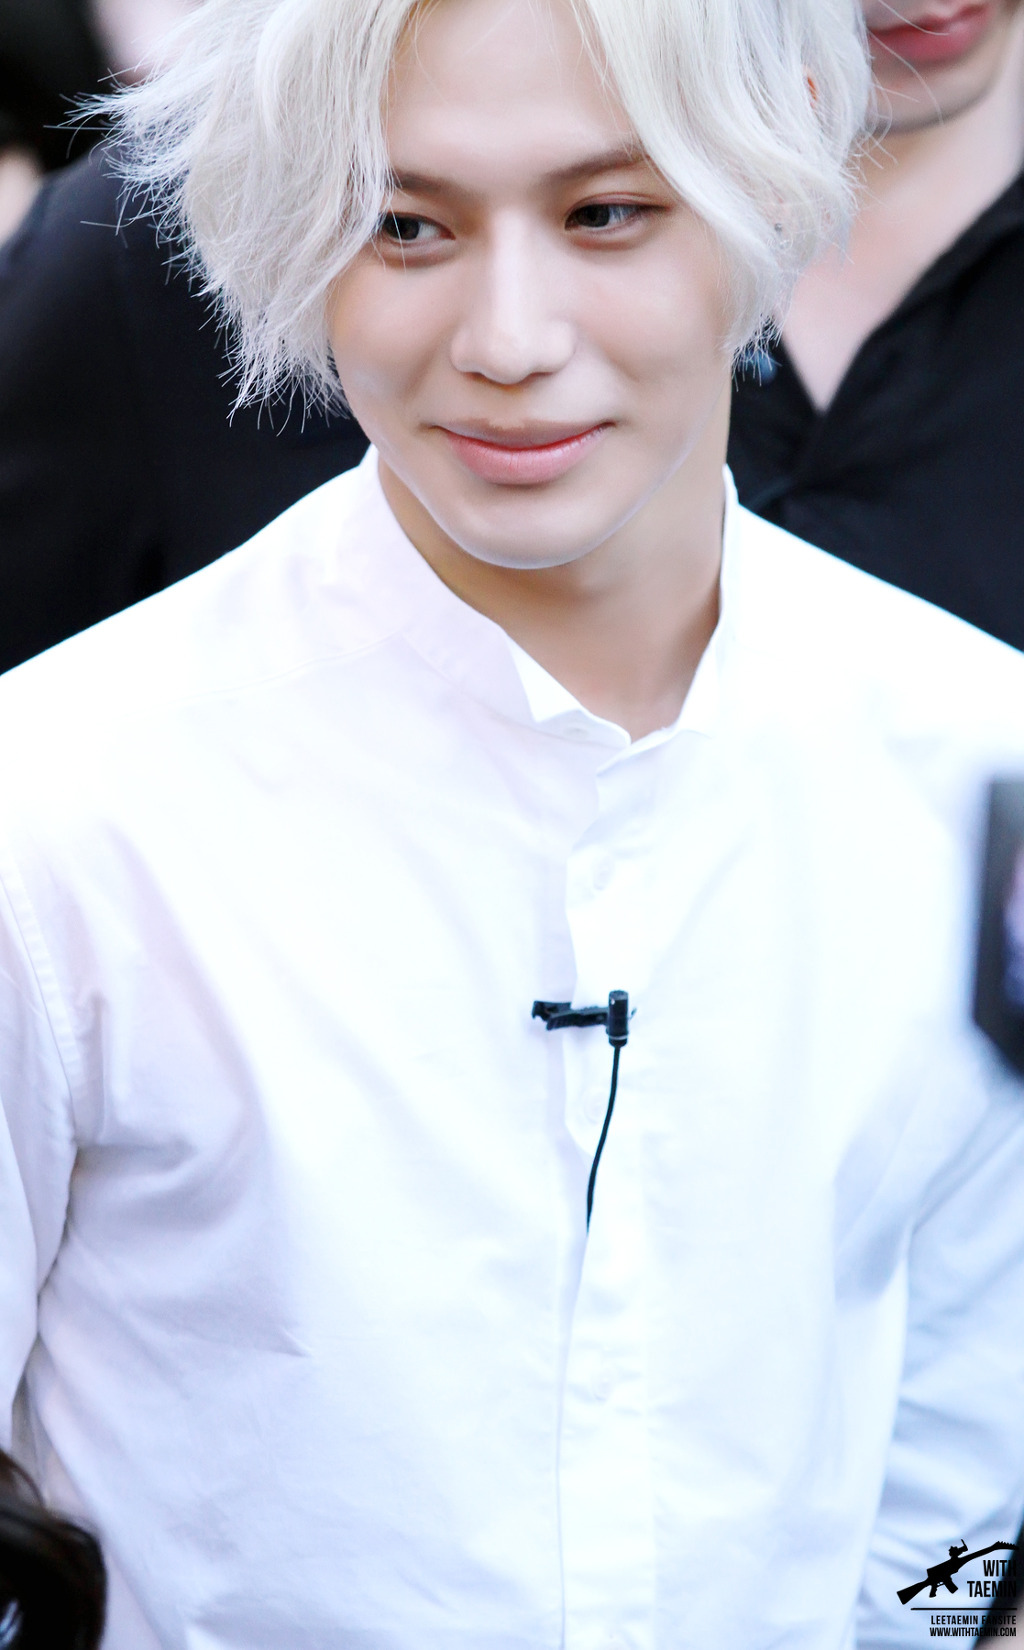 withTAEMIN0816M! COUNTDOWN BEGINS 